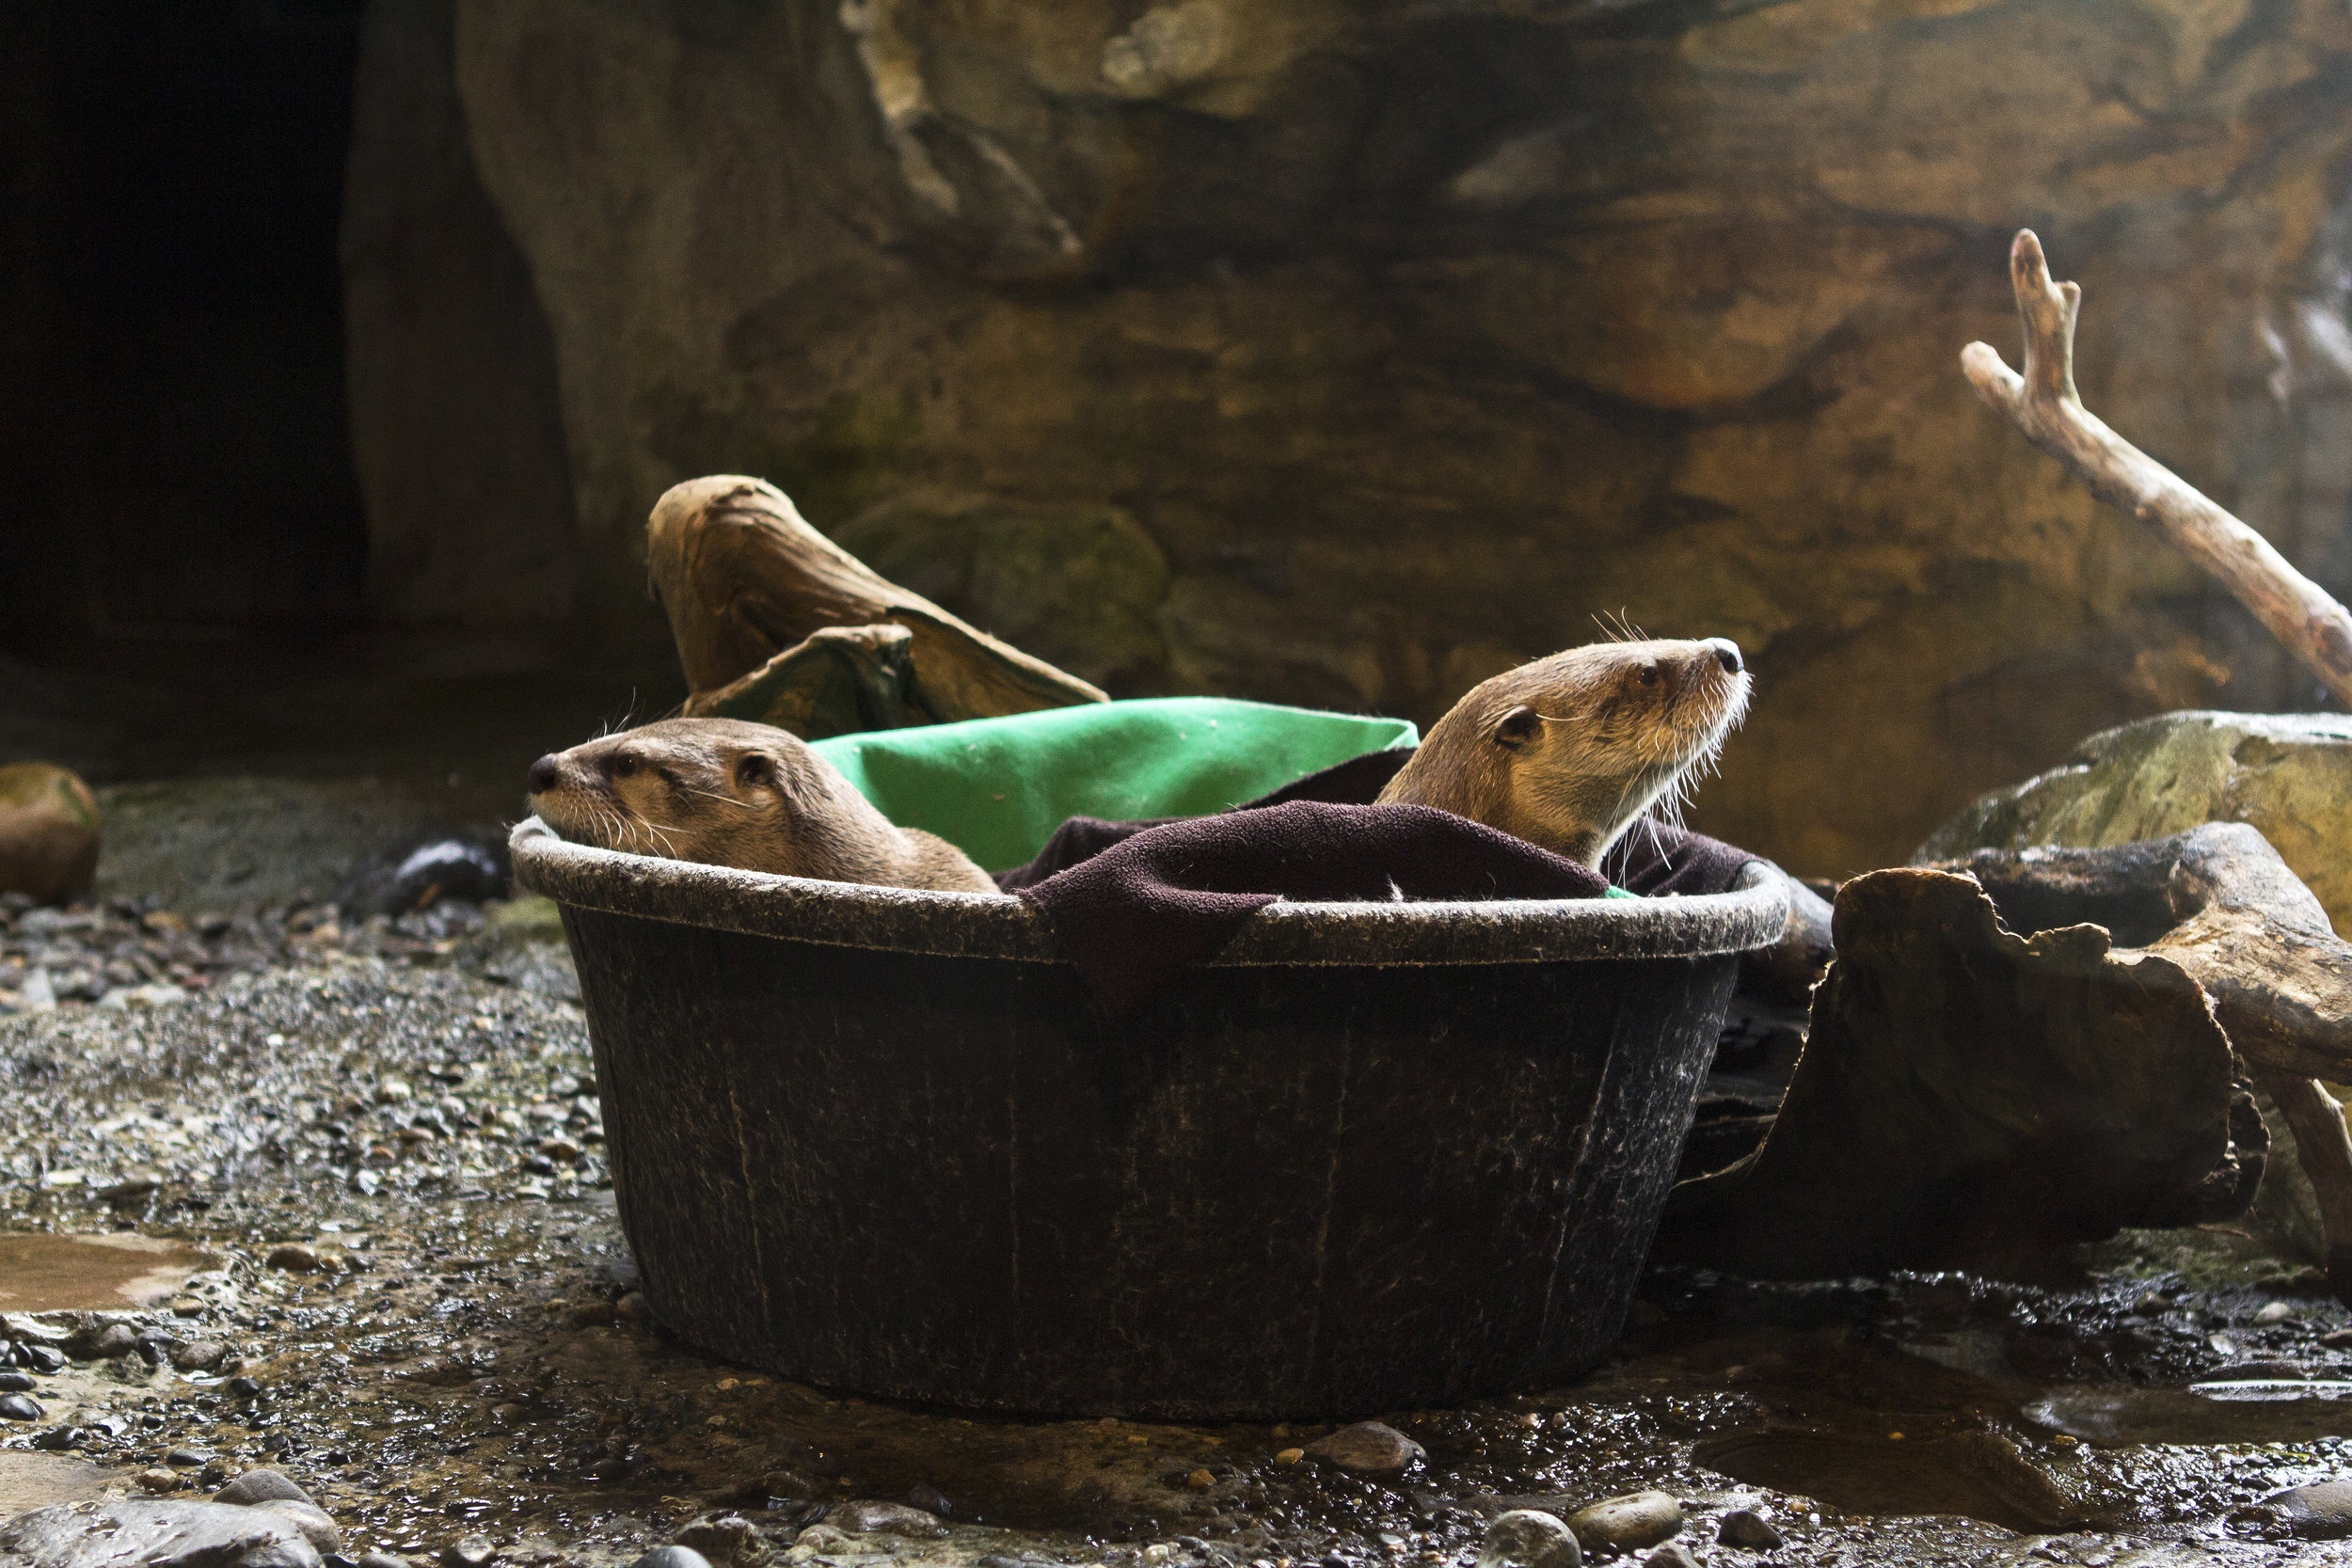 Otters Warm Up in a Bucket Filled with Fleece Blankets